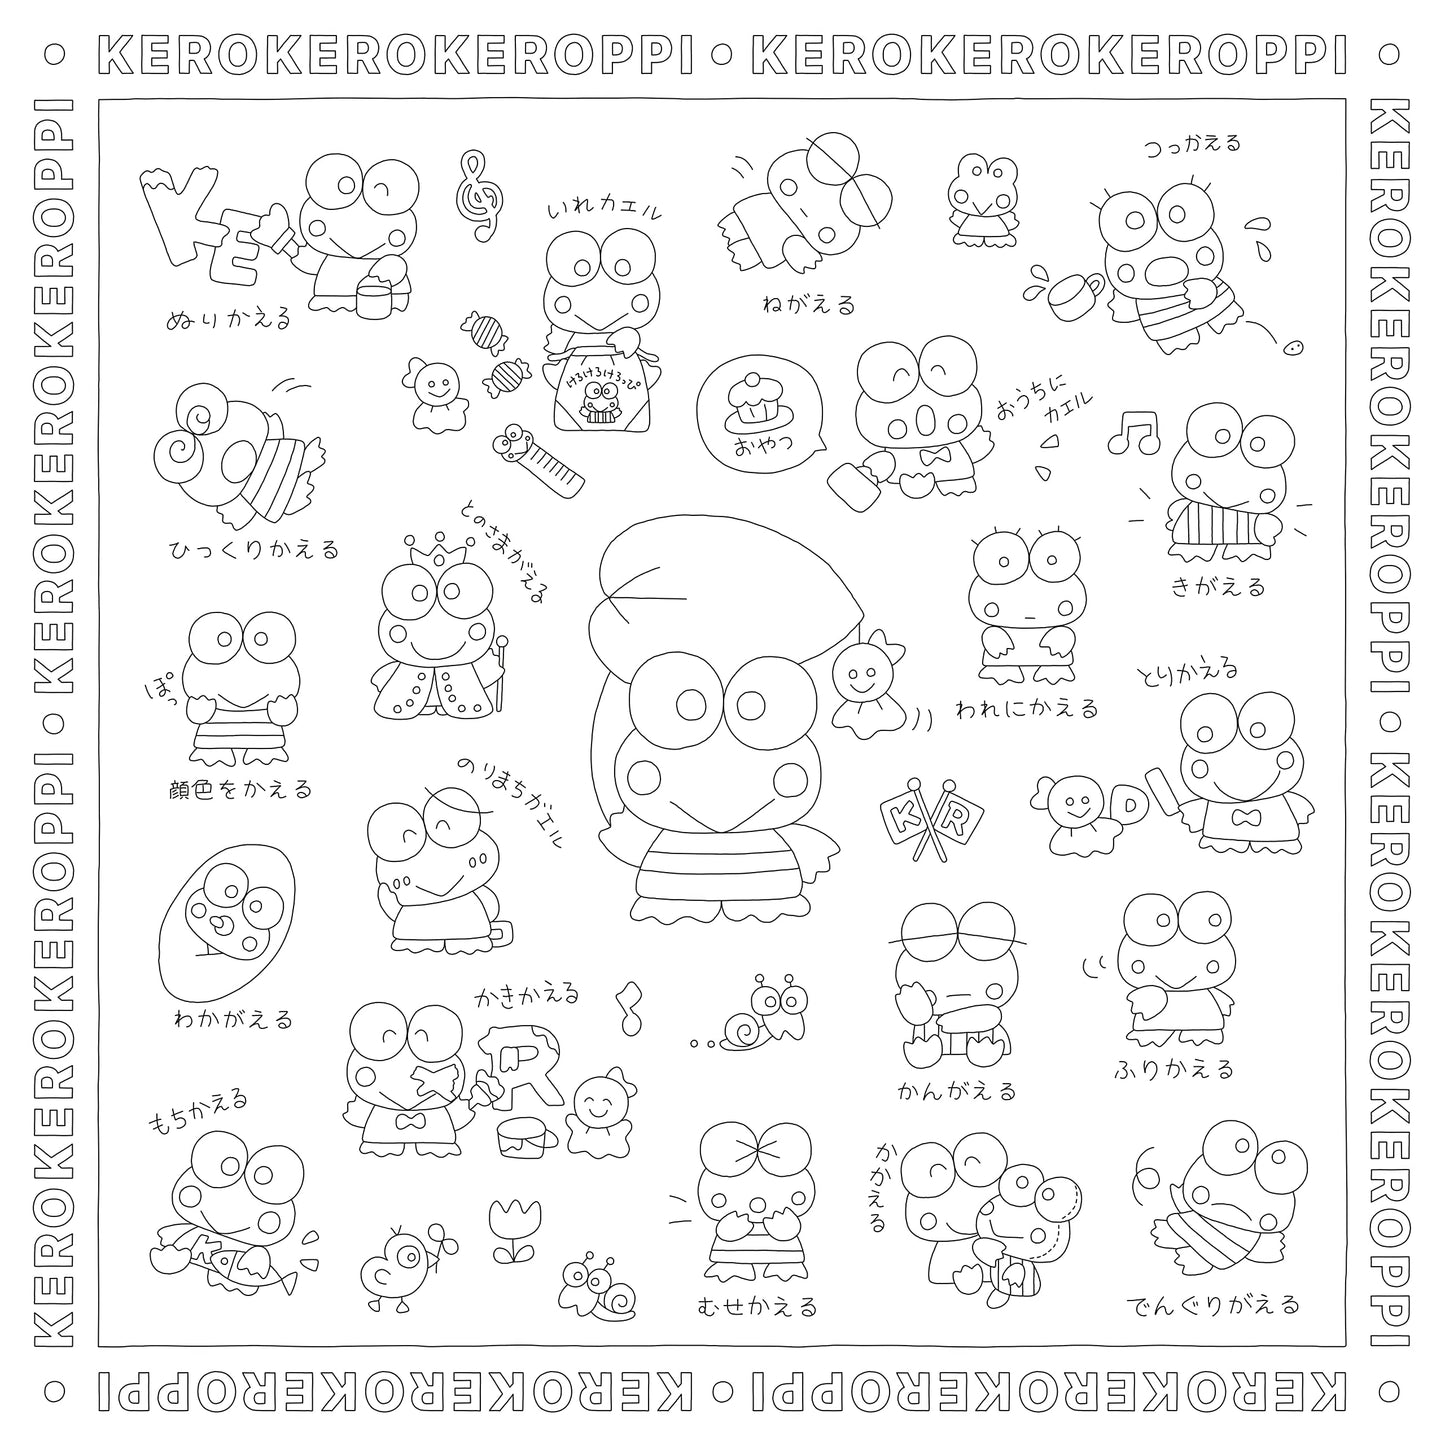 SANRIO Characters coloring book(2022)